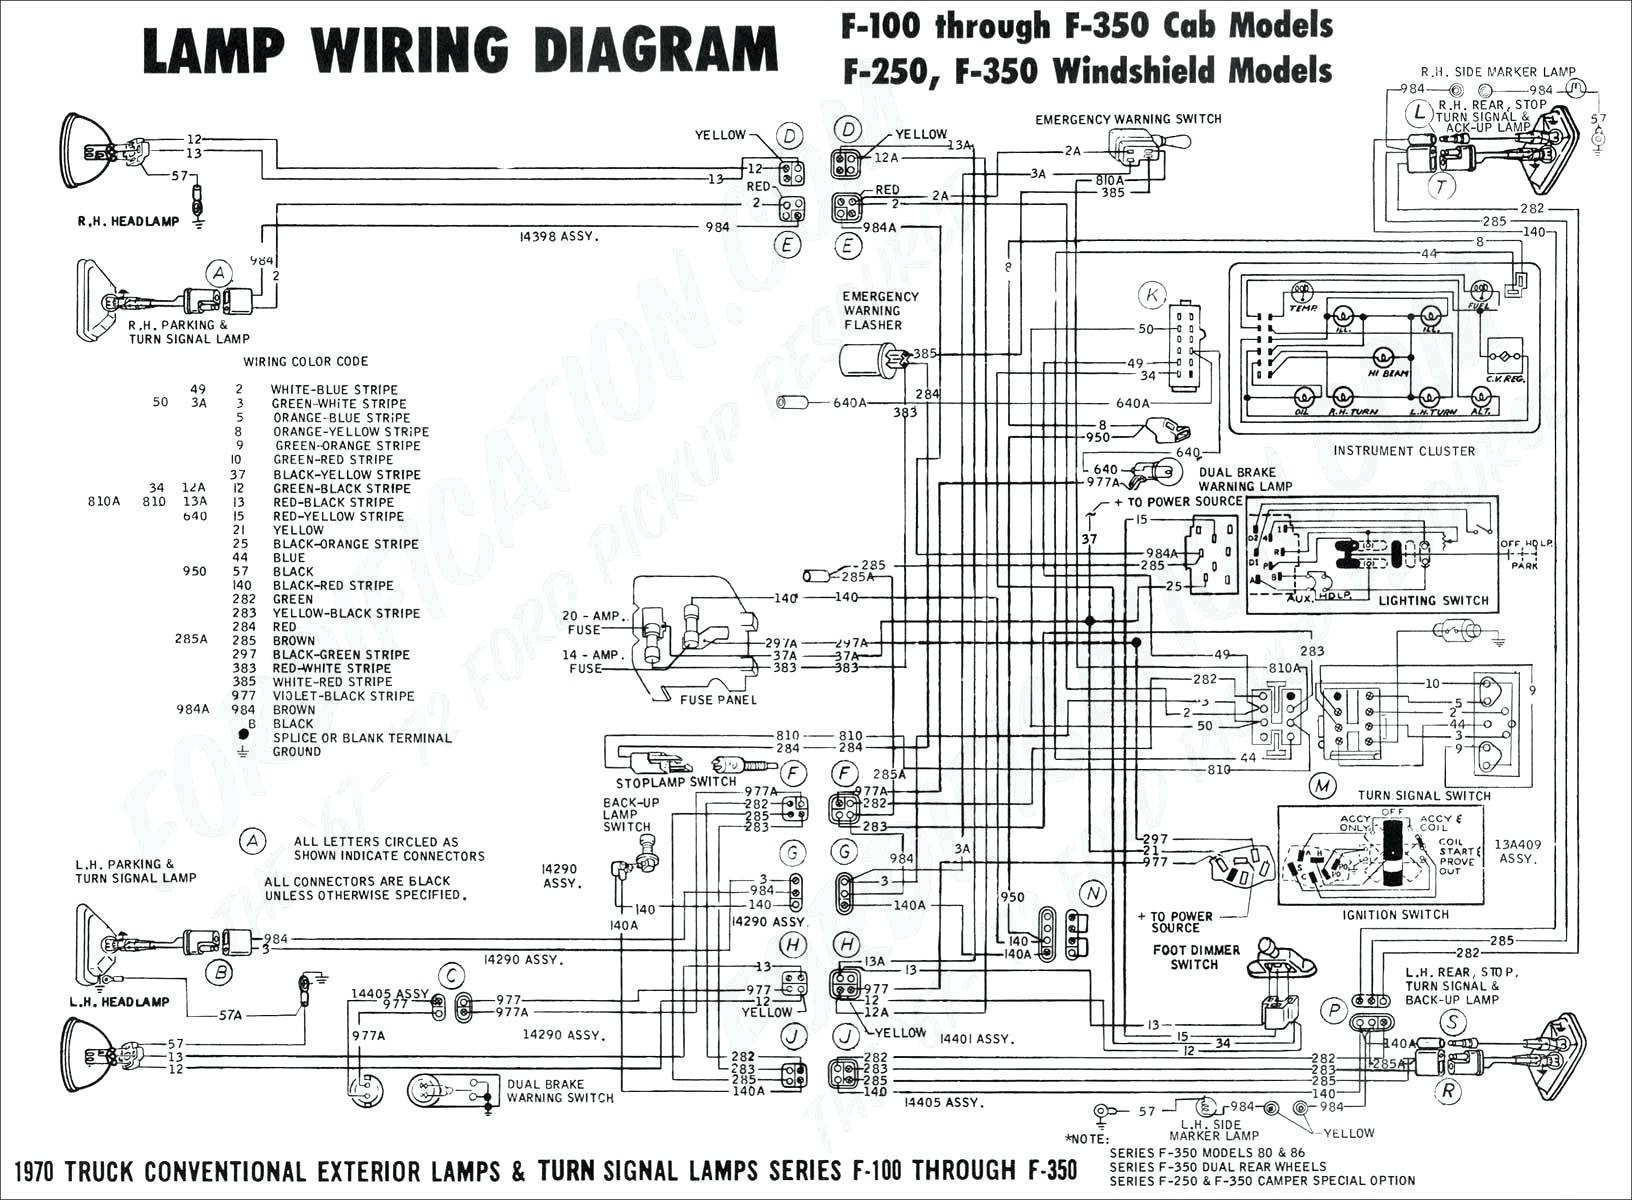 Trailer Wiring Diagram with Electric Brakes Wiring Diagram for Electric Trailer Kes Wiring Diagram for You Of Trailer Wiring Diagram with Electric Brakes